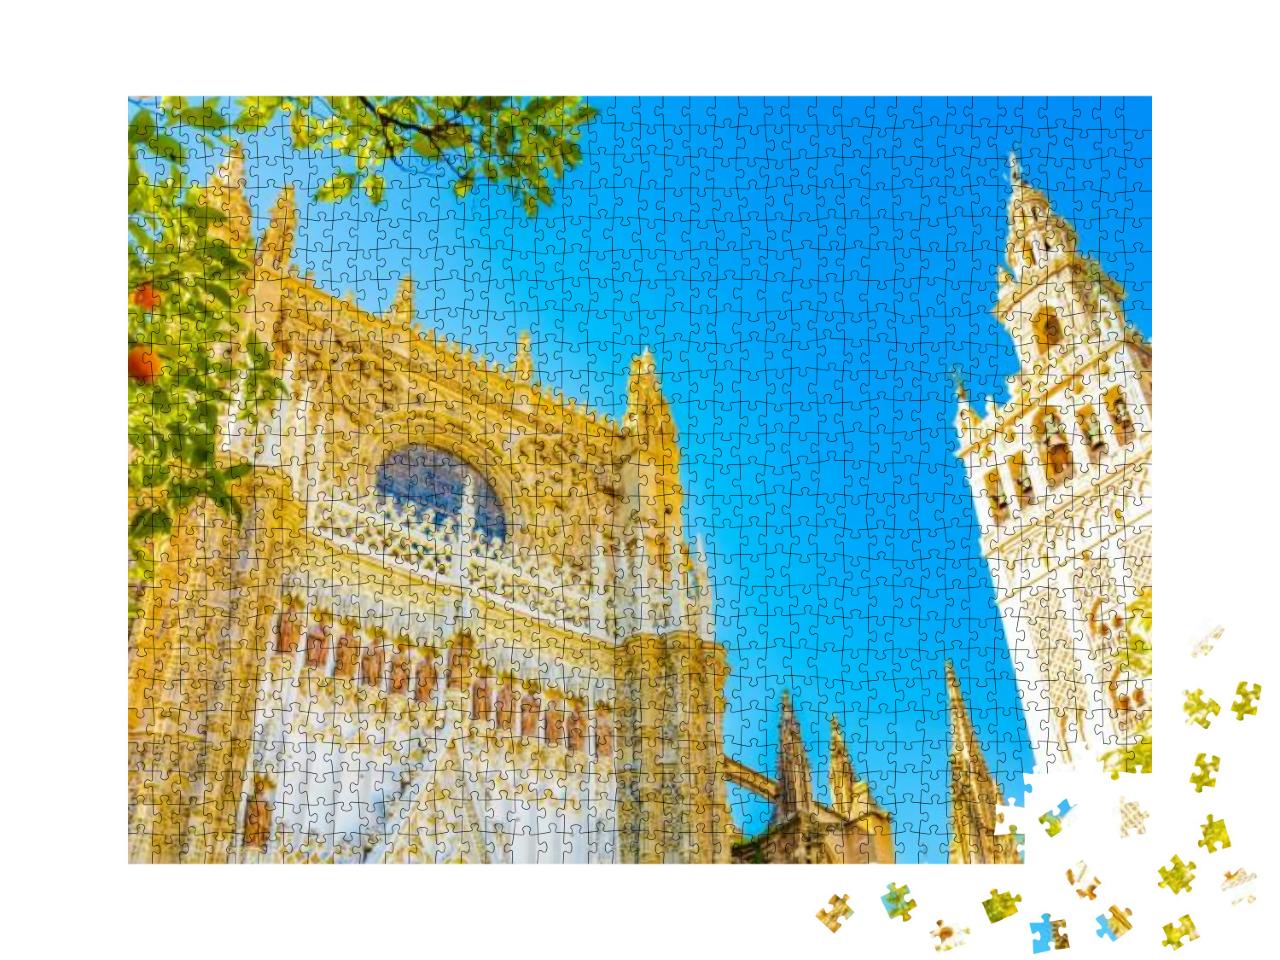 Sevilla Cathedral & Giralda Tower Over Blue Sky in Sevill... Jigsaw Puzzle with 1000 pieces